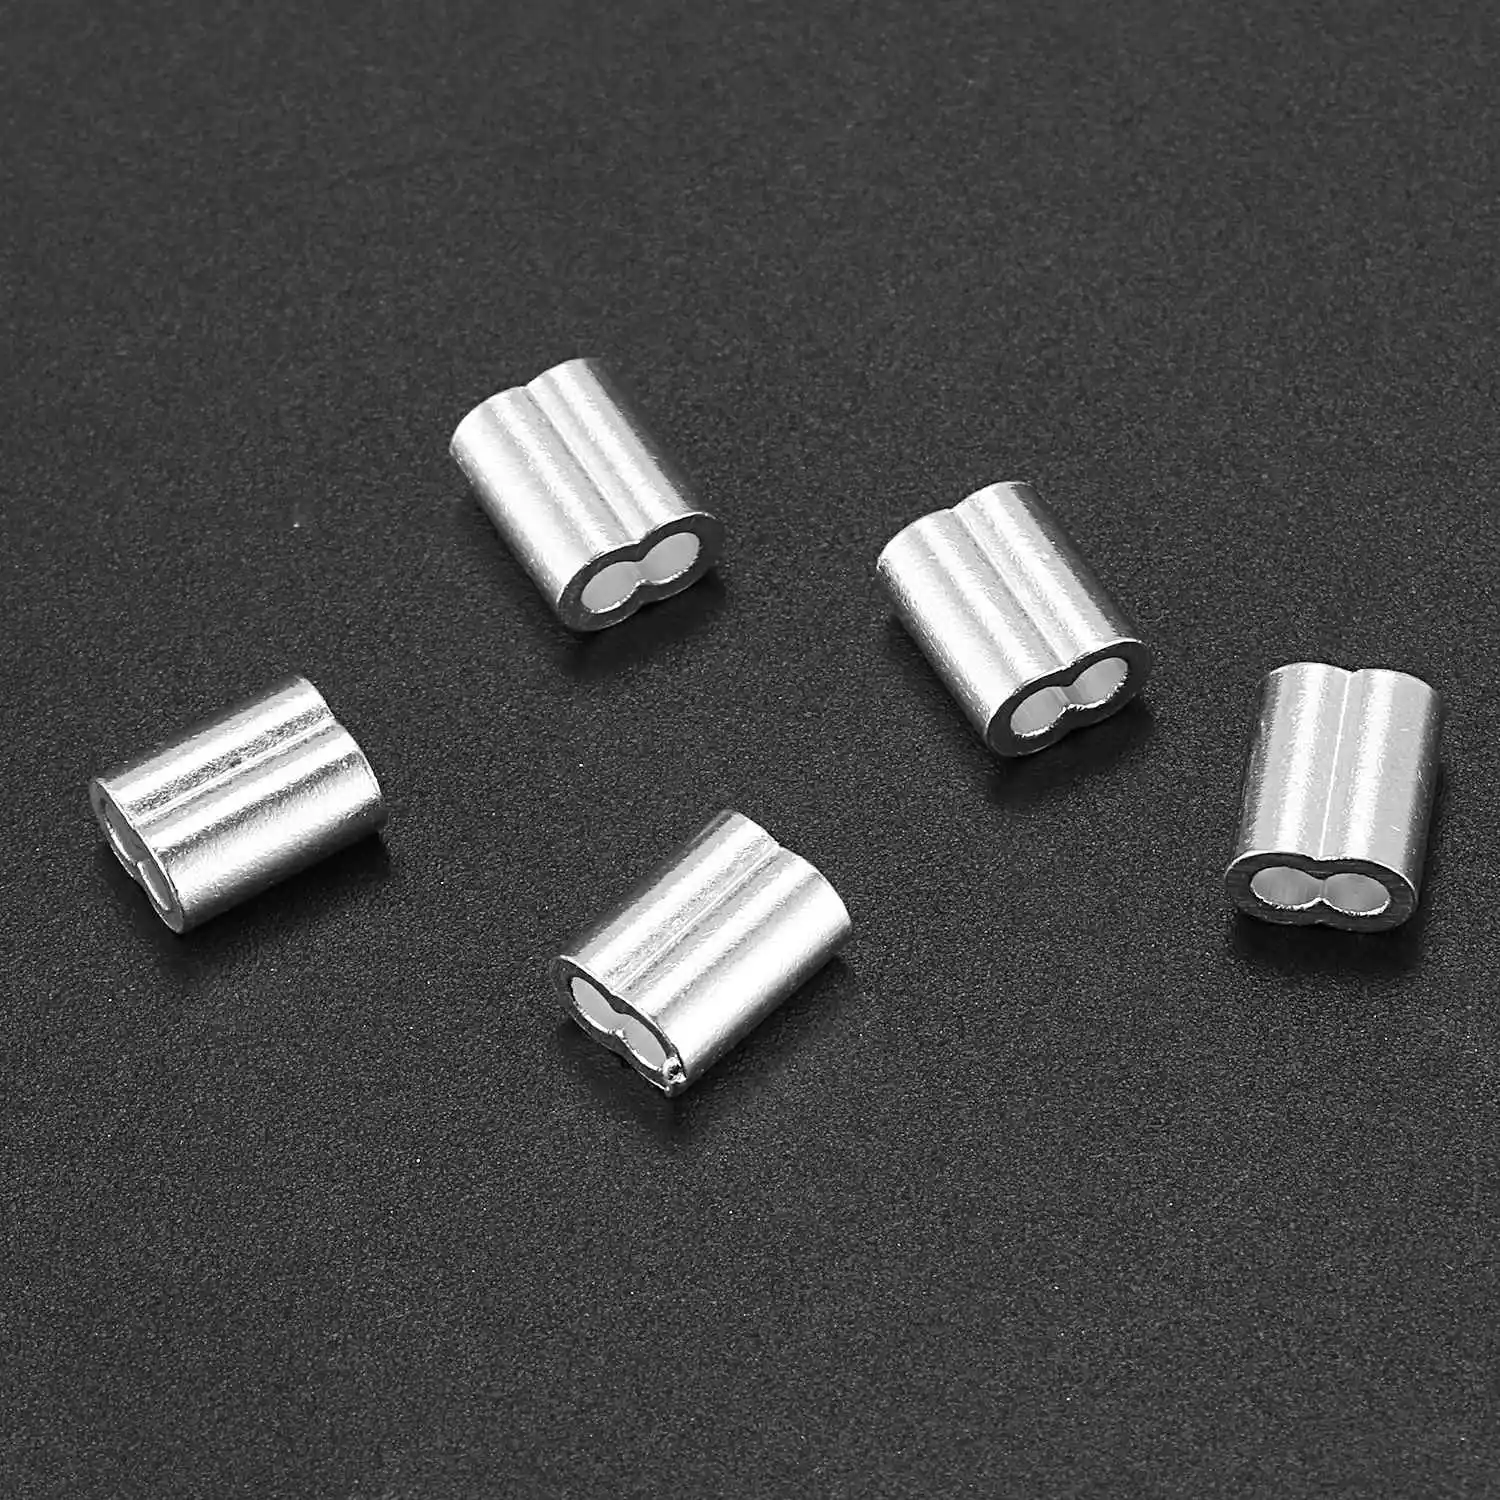 High Quaity 100 pcs 1.5mm Wire Rope Aluminum Sleeves Clip Fittings Cable Crimps + 10 M2 Stainless Steel Thimble Combo | Обустройство